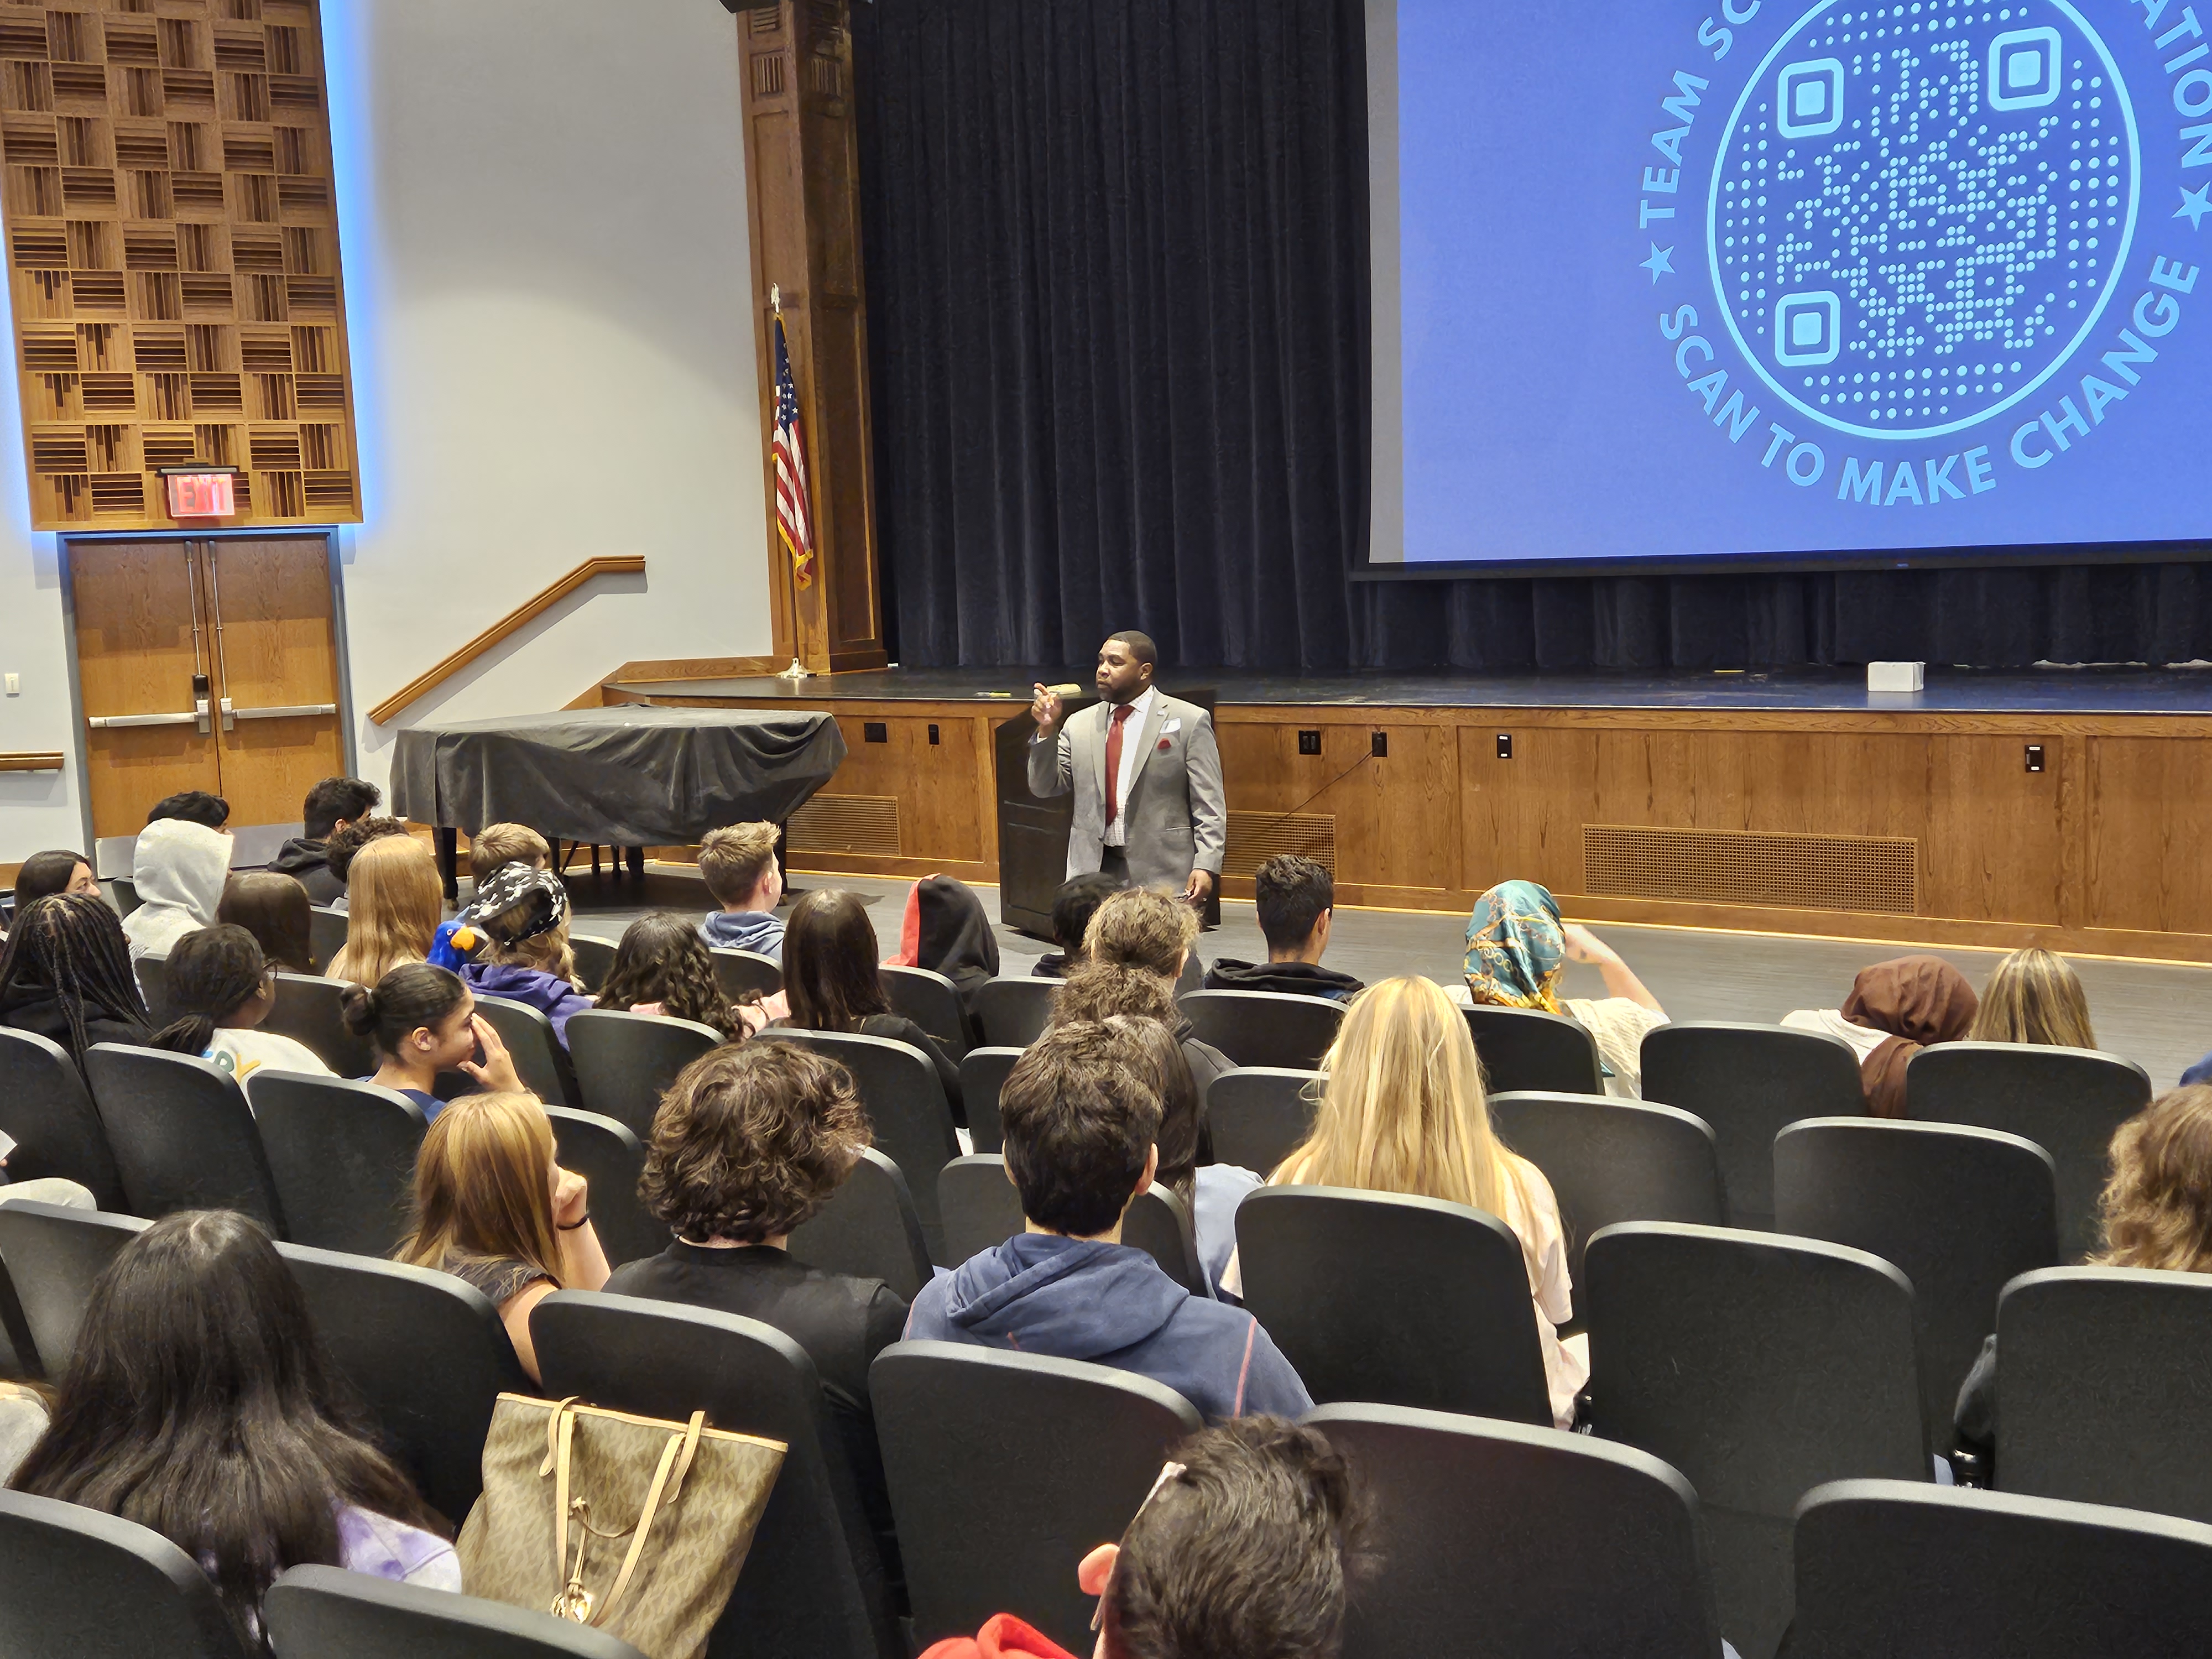 Officials from the Town of Babylon spoke to NBHS students about using the power of their voice to bring change and about internship opportunities in local government.